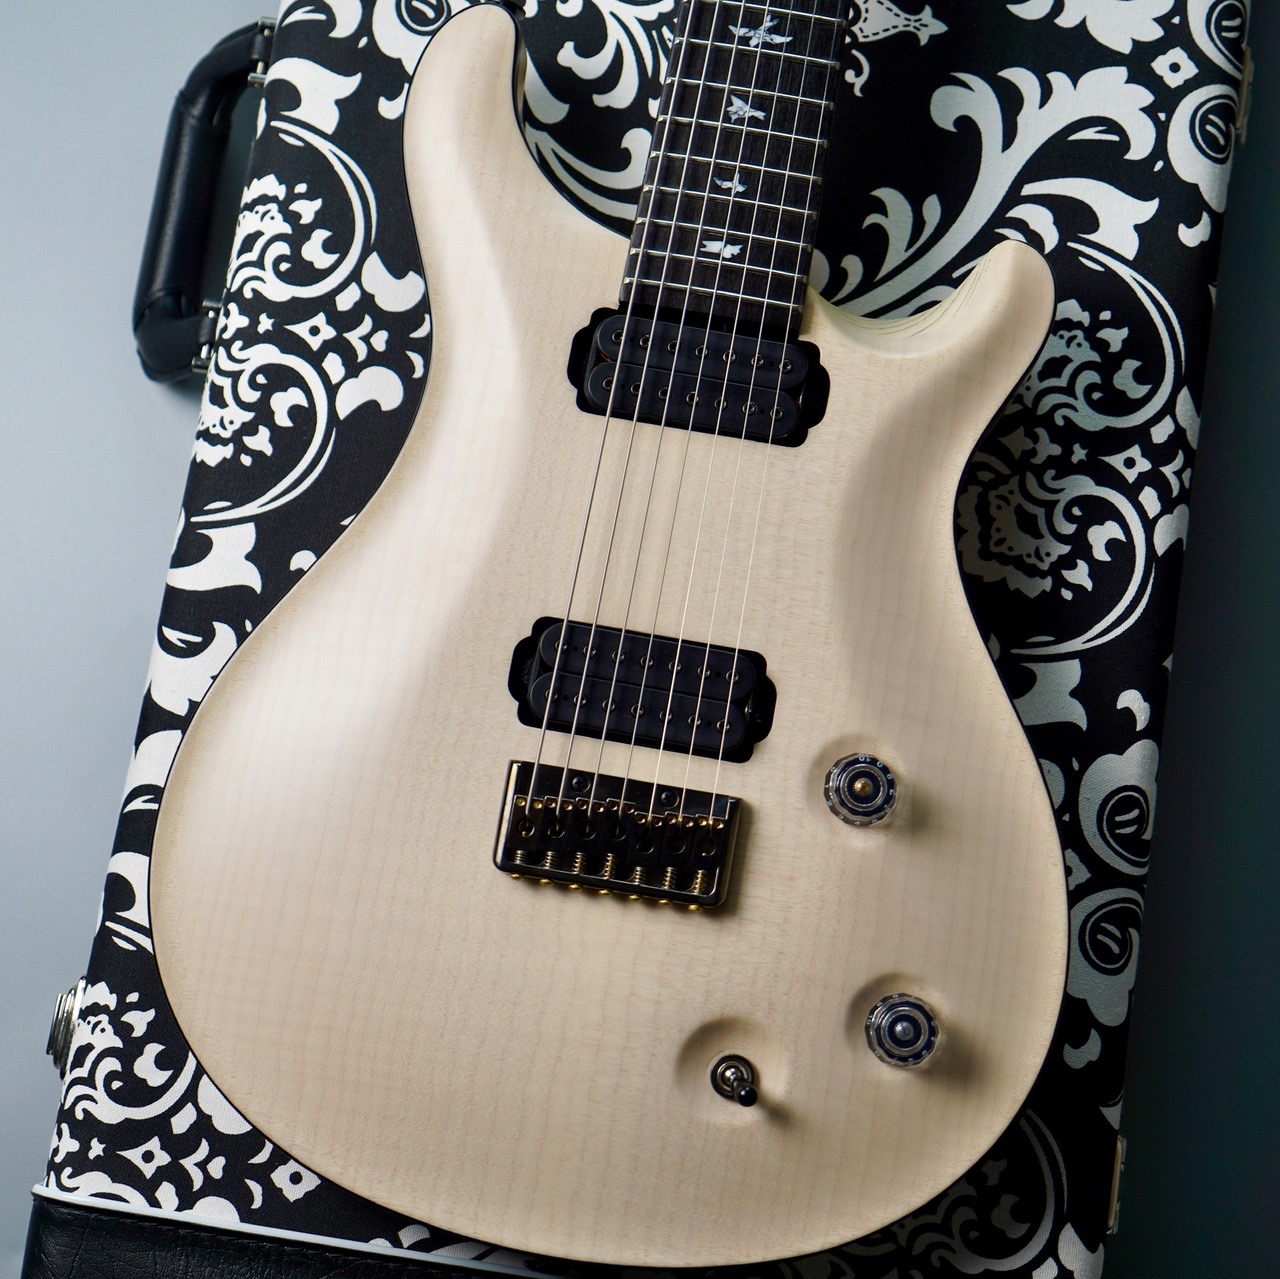 【Paul Reed Smith】 Private Stock #8043 McCarty 7-Strings/Translucent White Stain【Private Stockカレンダー掲載モデル】